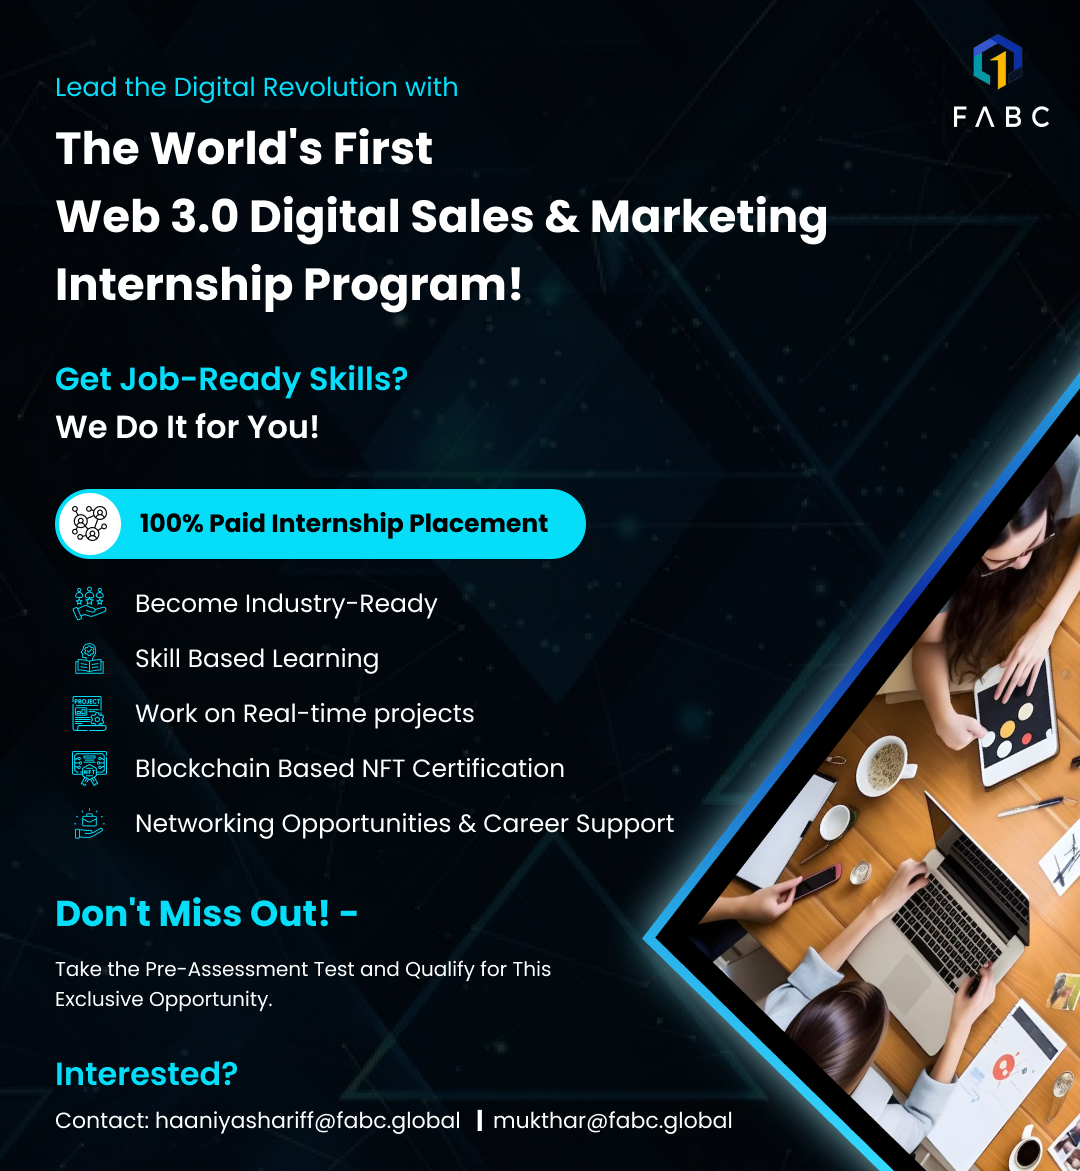 Join the World's #First Web 3.0 Digital Sales and #Marketing #Internship Program with guaranteed internship #placement!

Prepare for top roles in Web3 Marketing and transform your #career.

Contact: e-learning@fabc.global

Comment 'Now' if you're interested!

#FABCGlobal #Web3